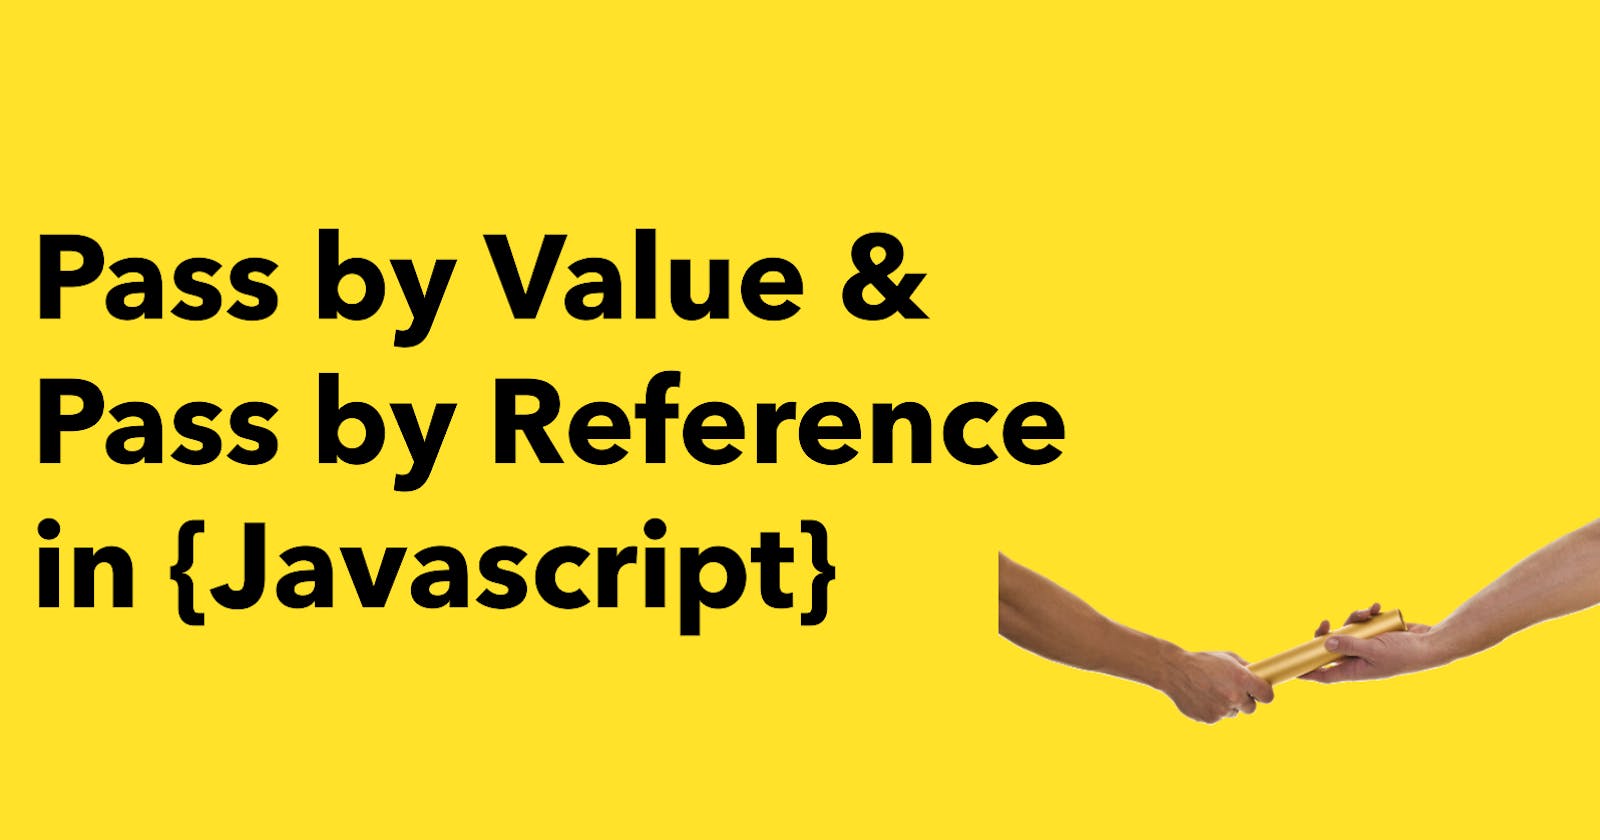 A simpler way of explaining Pass by value and Pass by reference in javascript